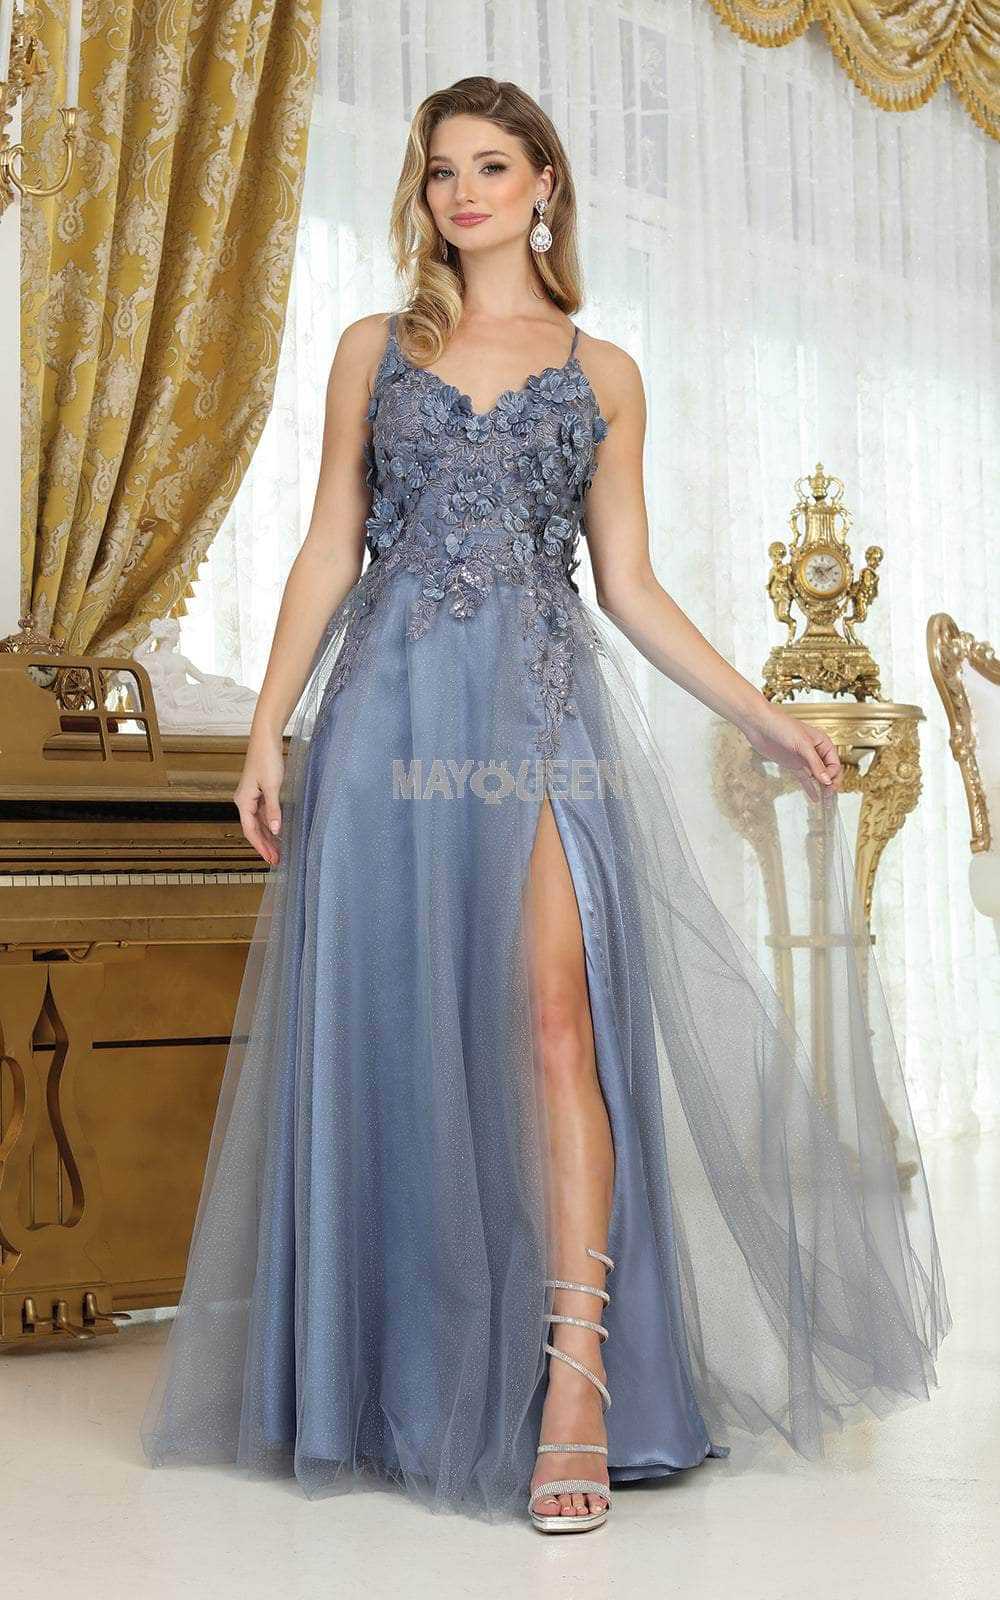 May Queen, May Queen MQ2016 - V-Neck 3D Floral Appliqued Prom Gown